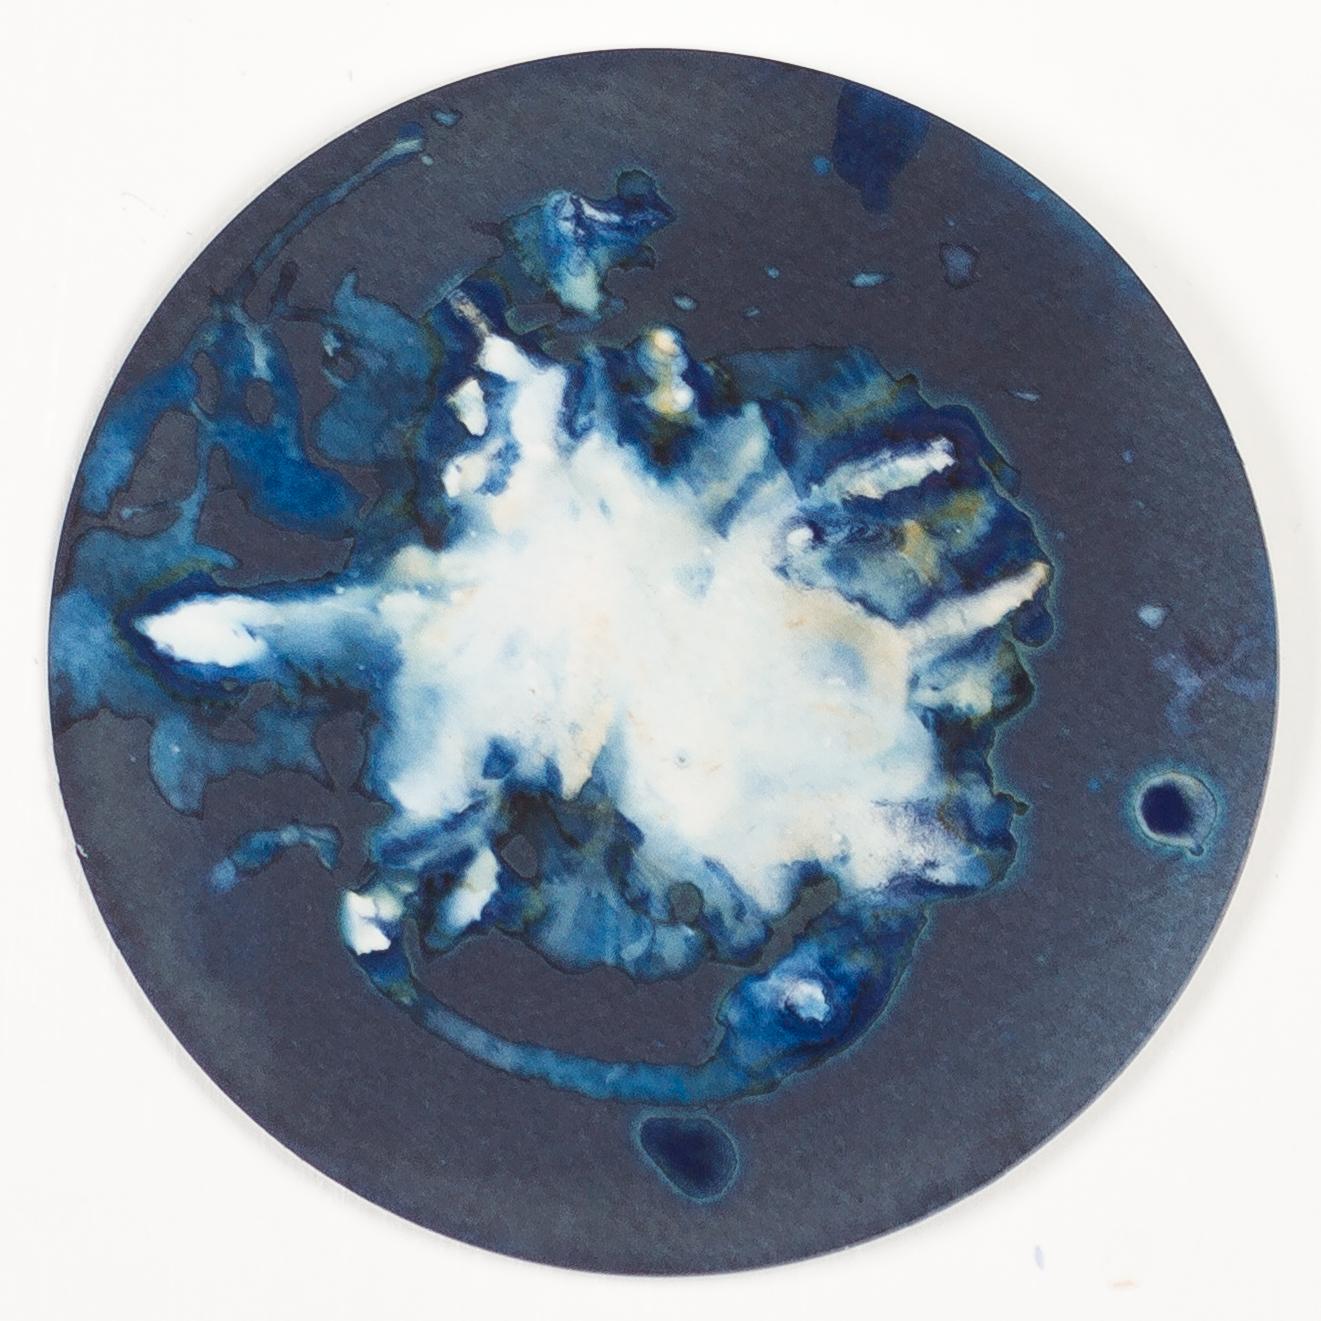 Algas 14, 41 y 68. Cyanotype photograhs mounted in high resistance glass dish For Sale 3